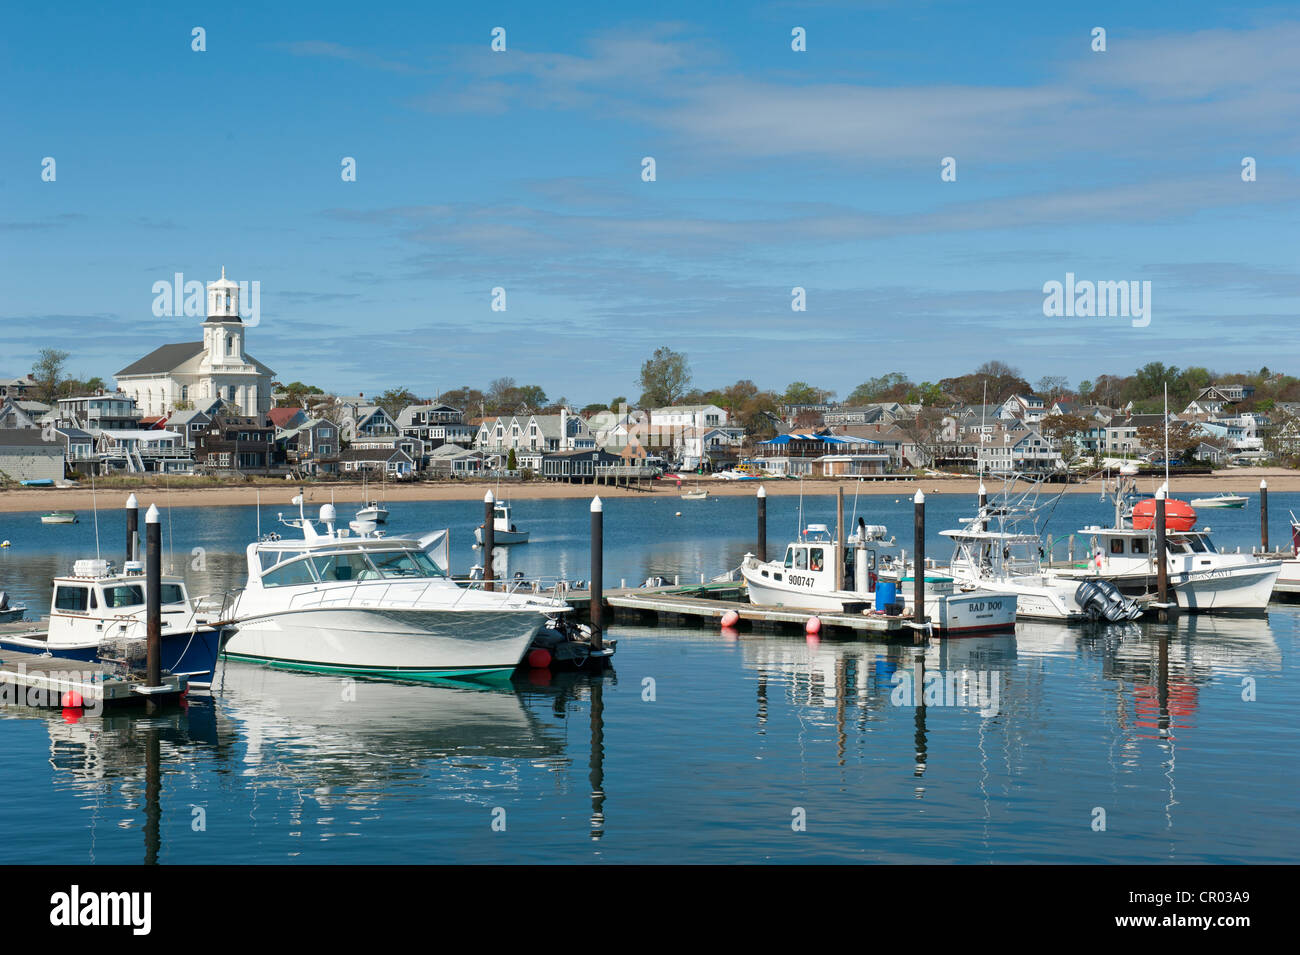 View from the pier towards boats and the city, Provincetown, Cape Cod, Massachusetts, USA, North America Stock Photo